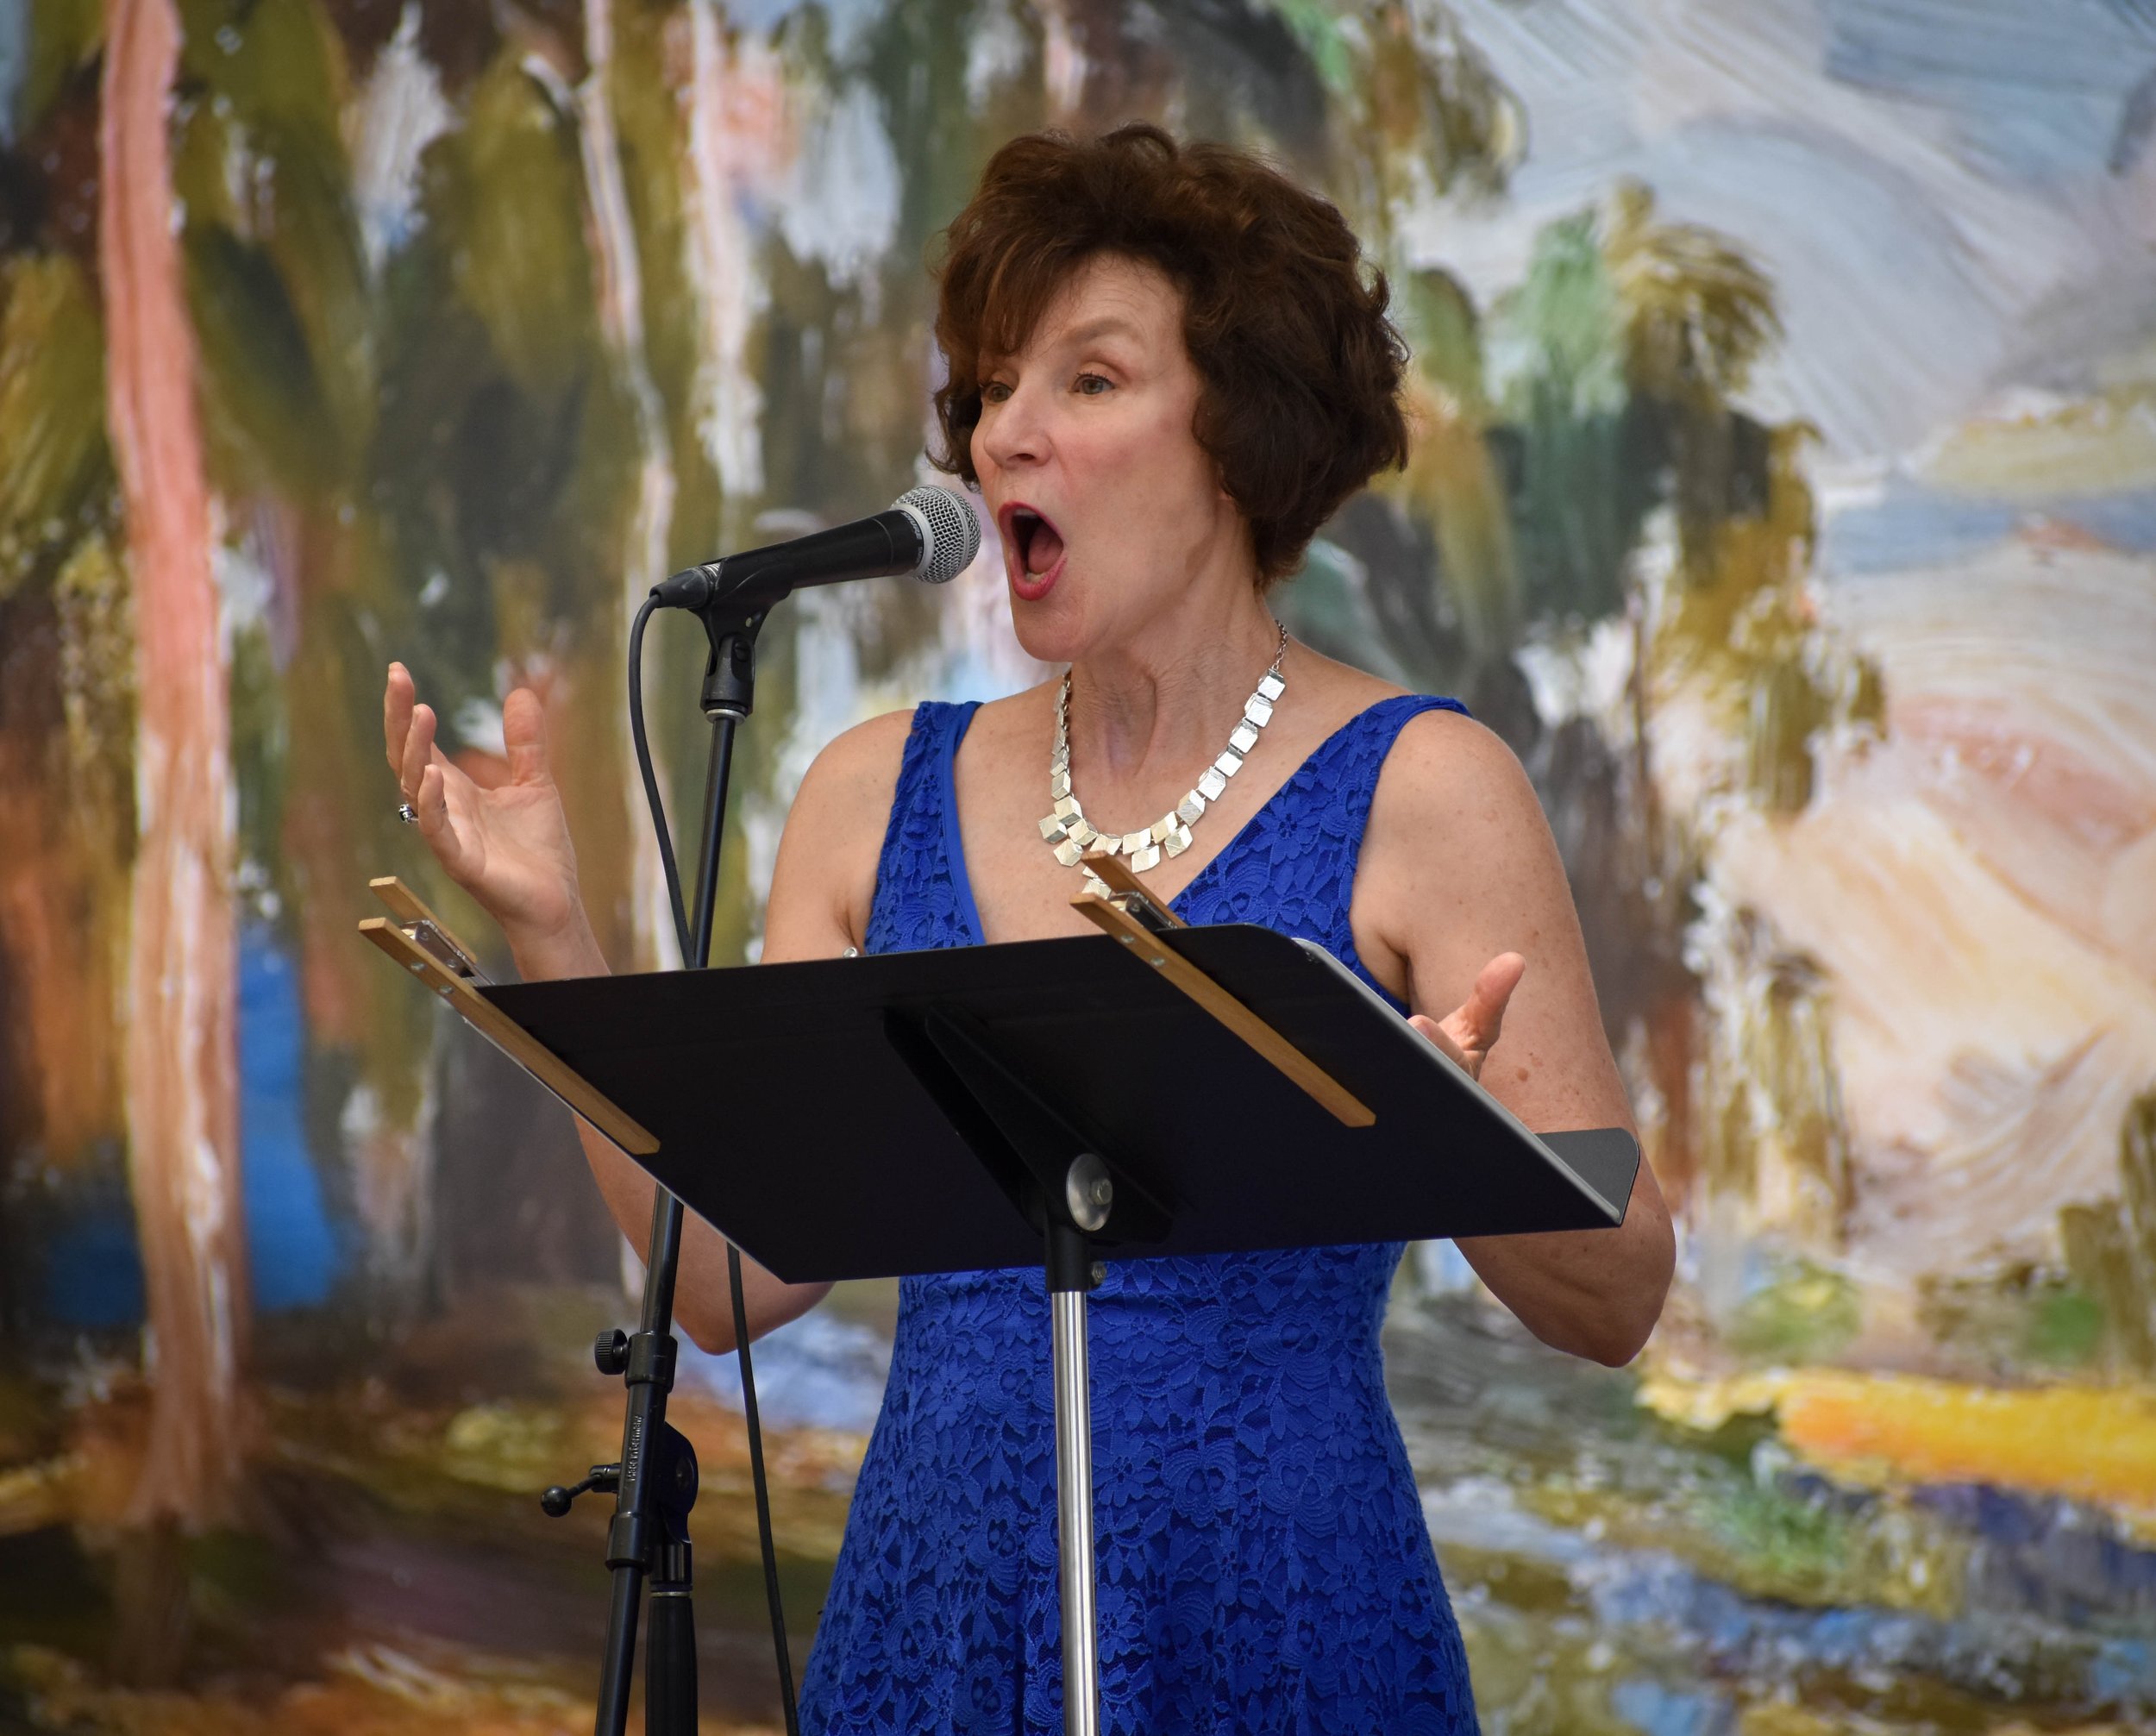 07-17-2022 LCCB Fest of Arts Summer Concert Series by Peyton Webster72-34.jpg